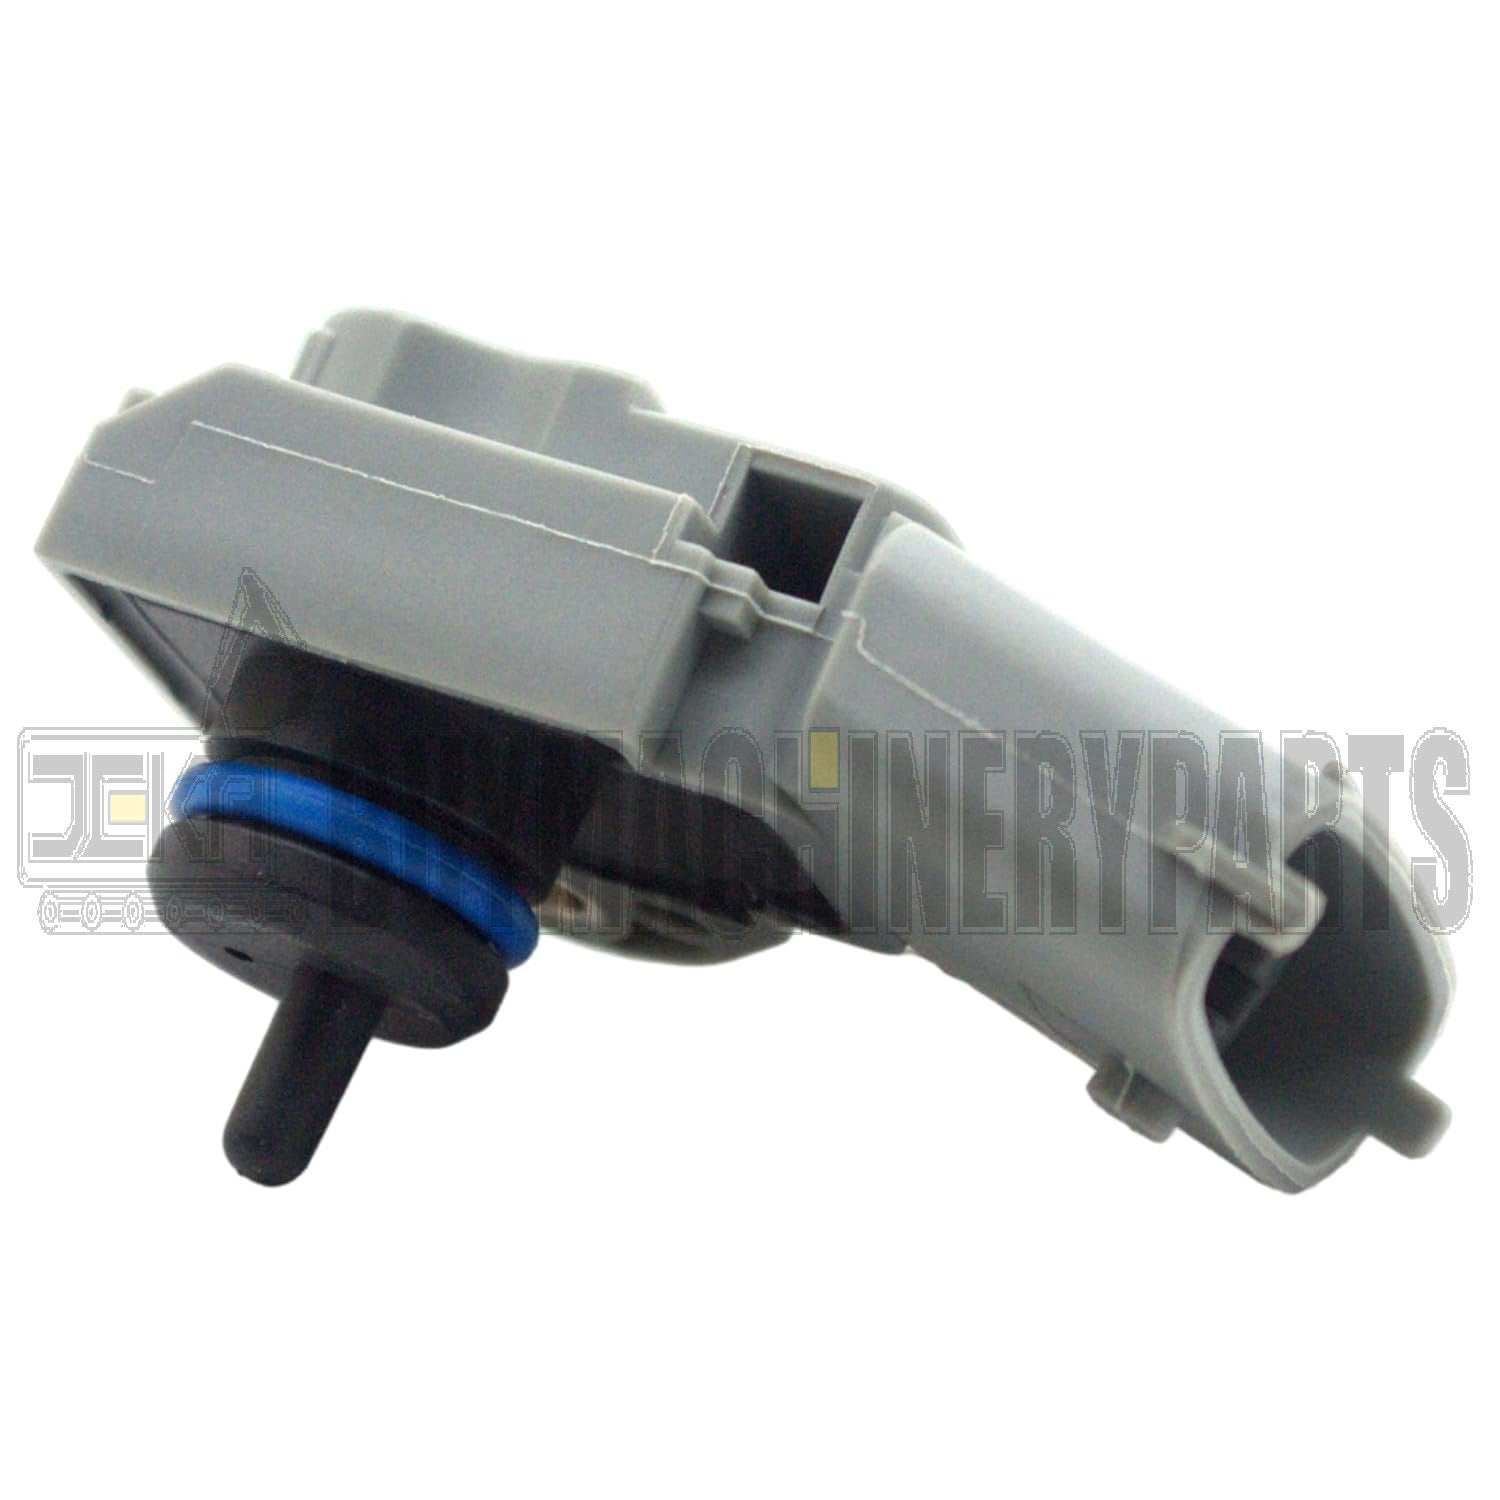 Fuel Pressure Sensor 30650015 Compatible with Volvo S60 S80 V70 XC70 XC90, Replacement for 0261230110 0261230108 31272730 30756097 8699449 LR005490 LR000524 LR005493